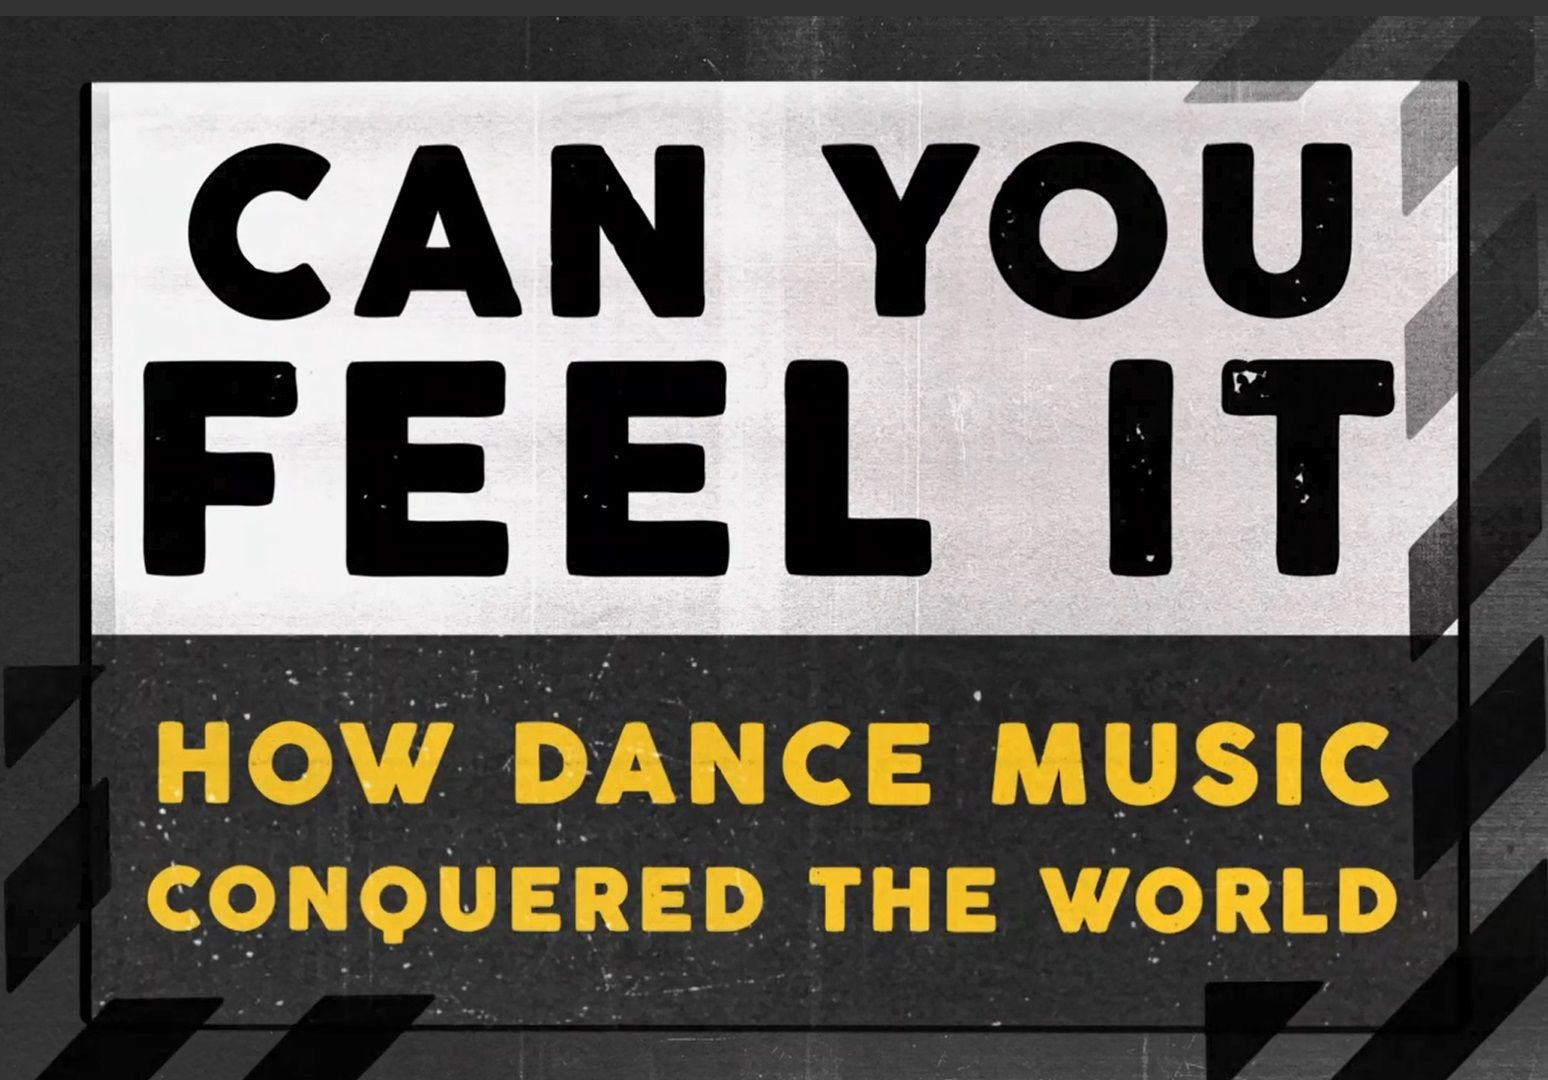 Show Can You Feel It - How Dance Music Conquered the World